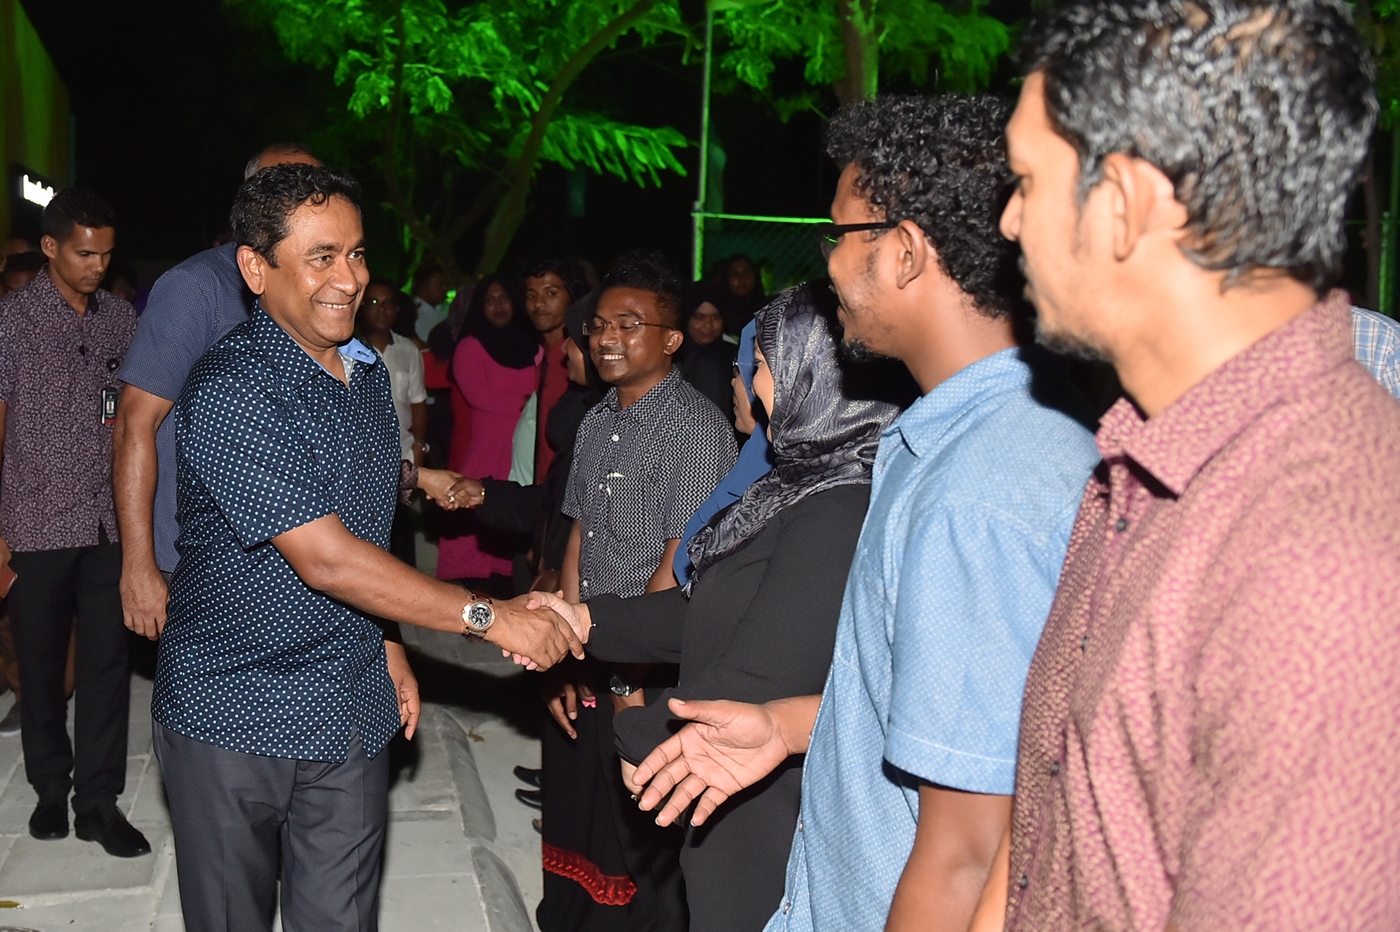 President Yameen Reiterates Administration S Aims Of Realising The People S Hopes And Dreams The President S Office